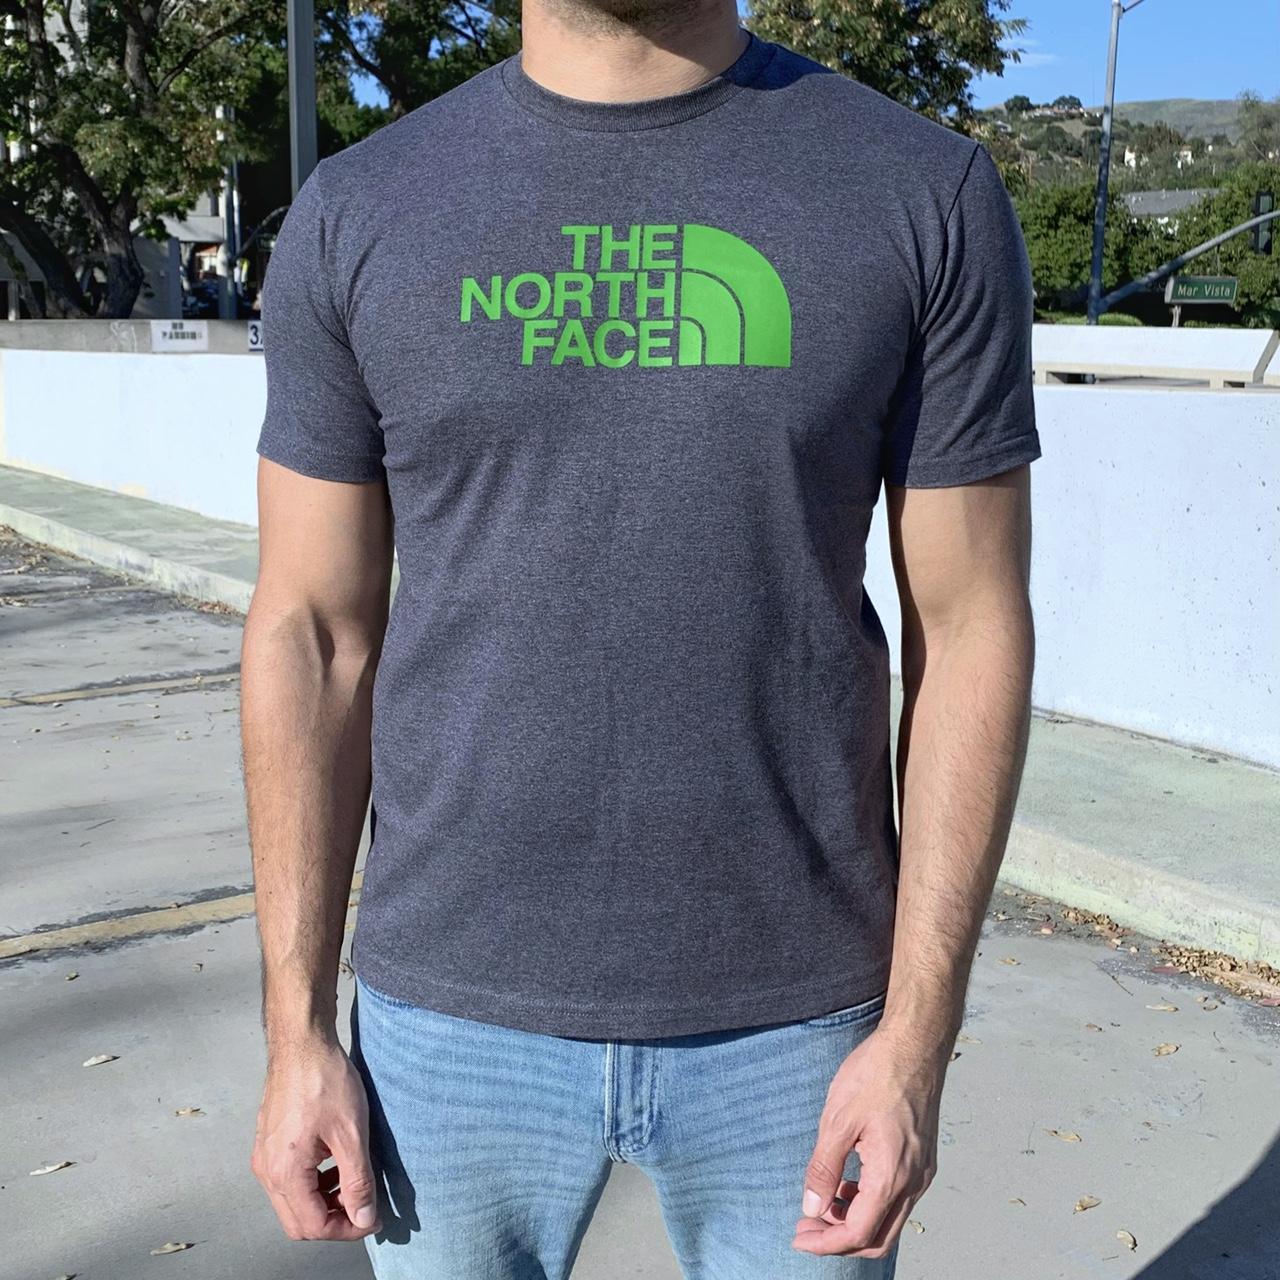 The North Face Logo Tee. Features big half dome logo